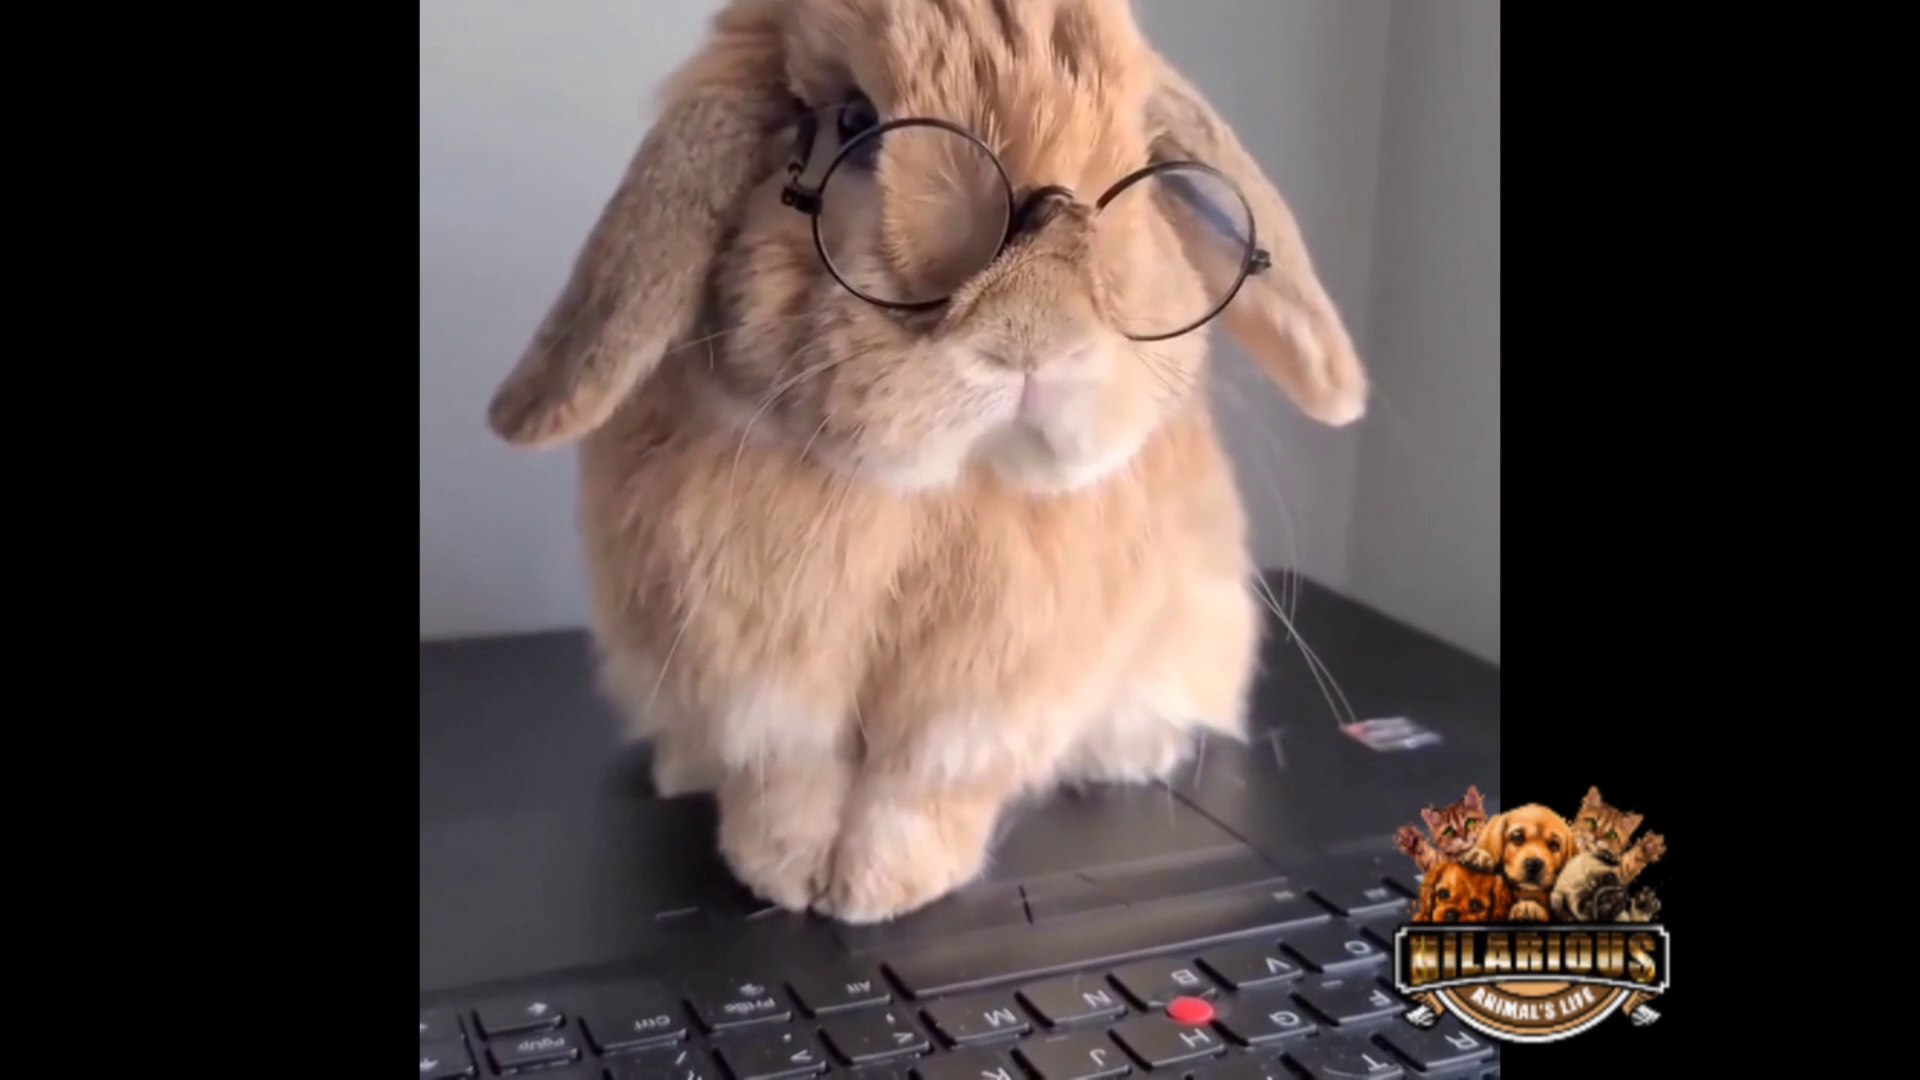 Funny Bunny Videos by Hilarious Animal's Life - Dailymotion